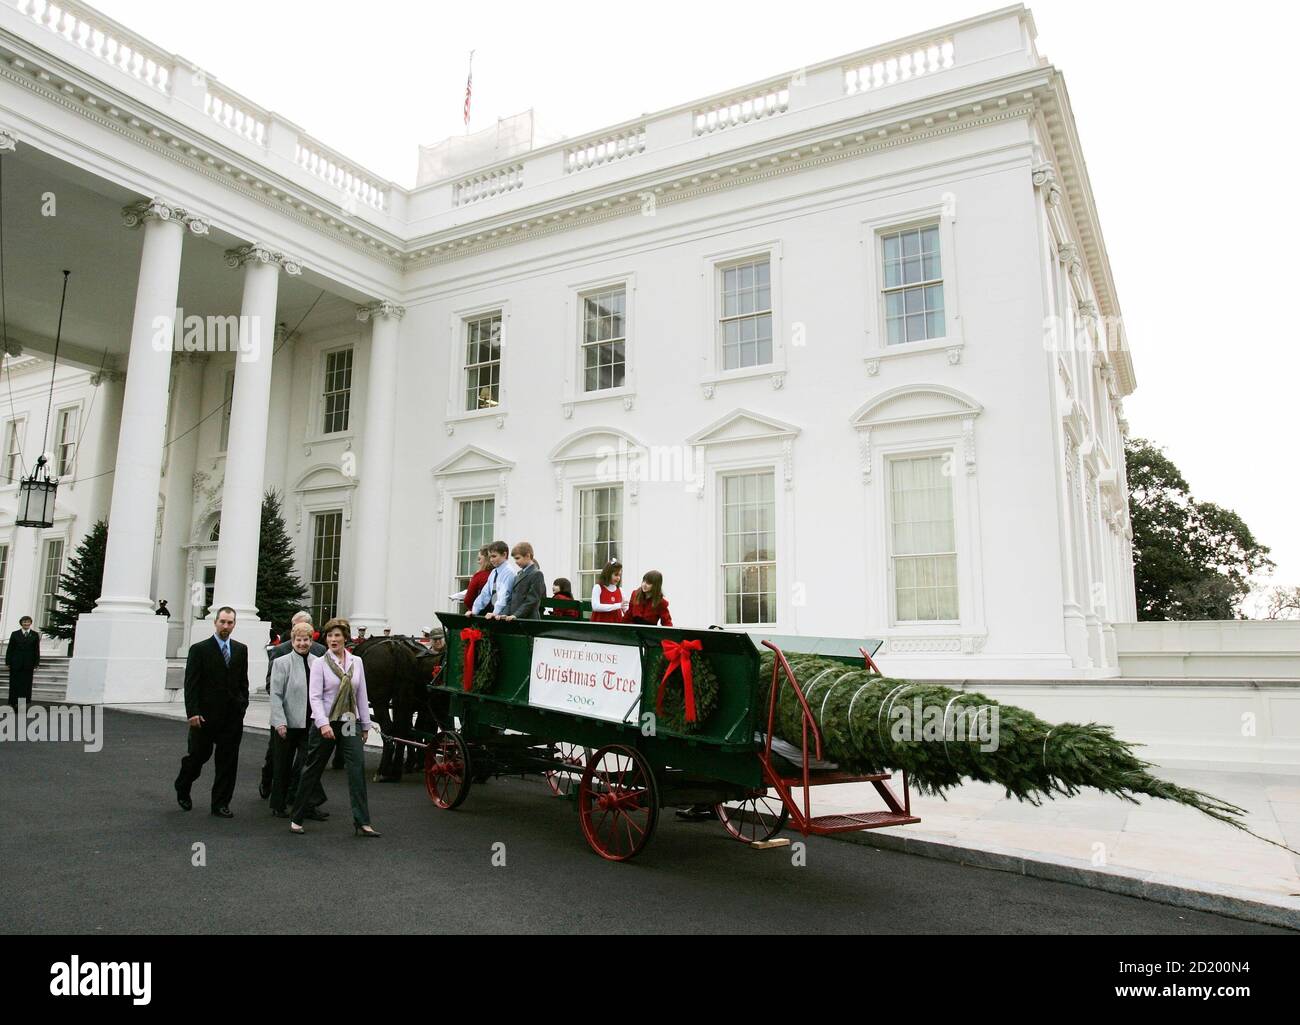 The White House Christmas Tree An 18 1 2 Foot Tall Douglas Fir Tree From Pennsylvania Is Delivered To First Lady Laura Bush Bottom R At The North Portico Of The White House November 27